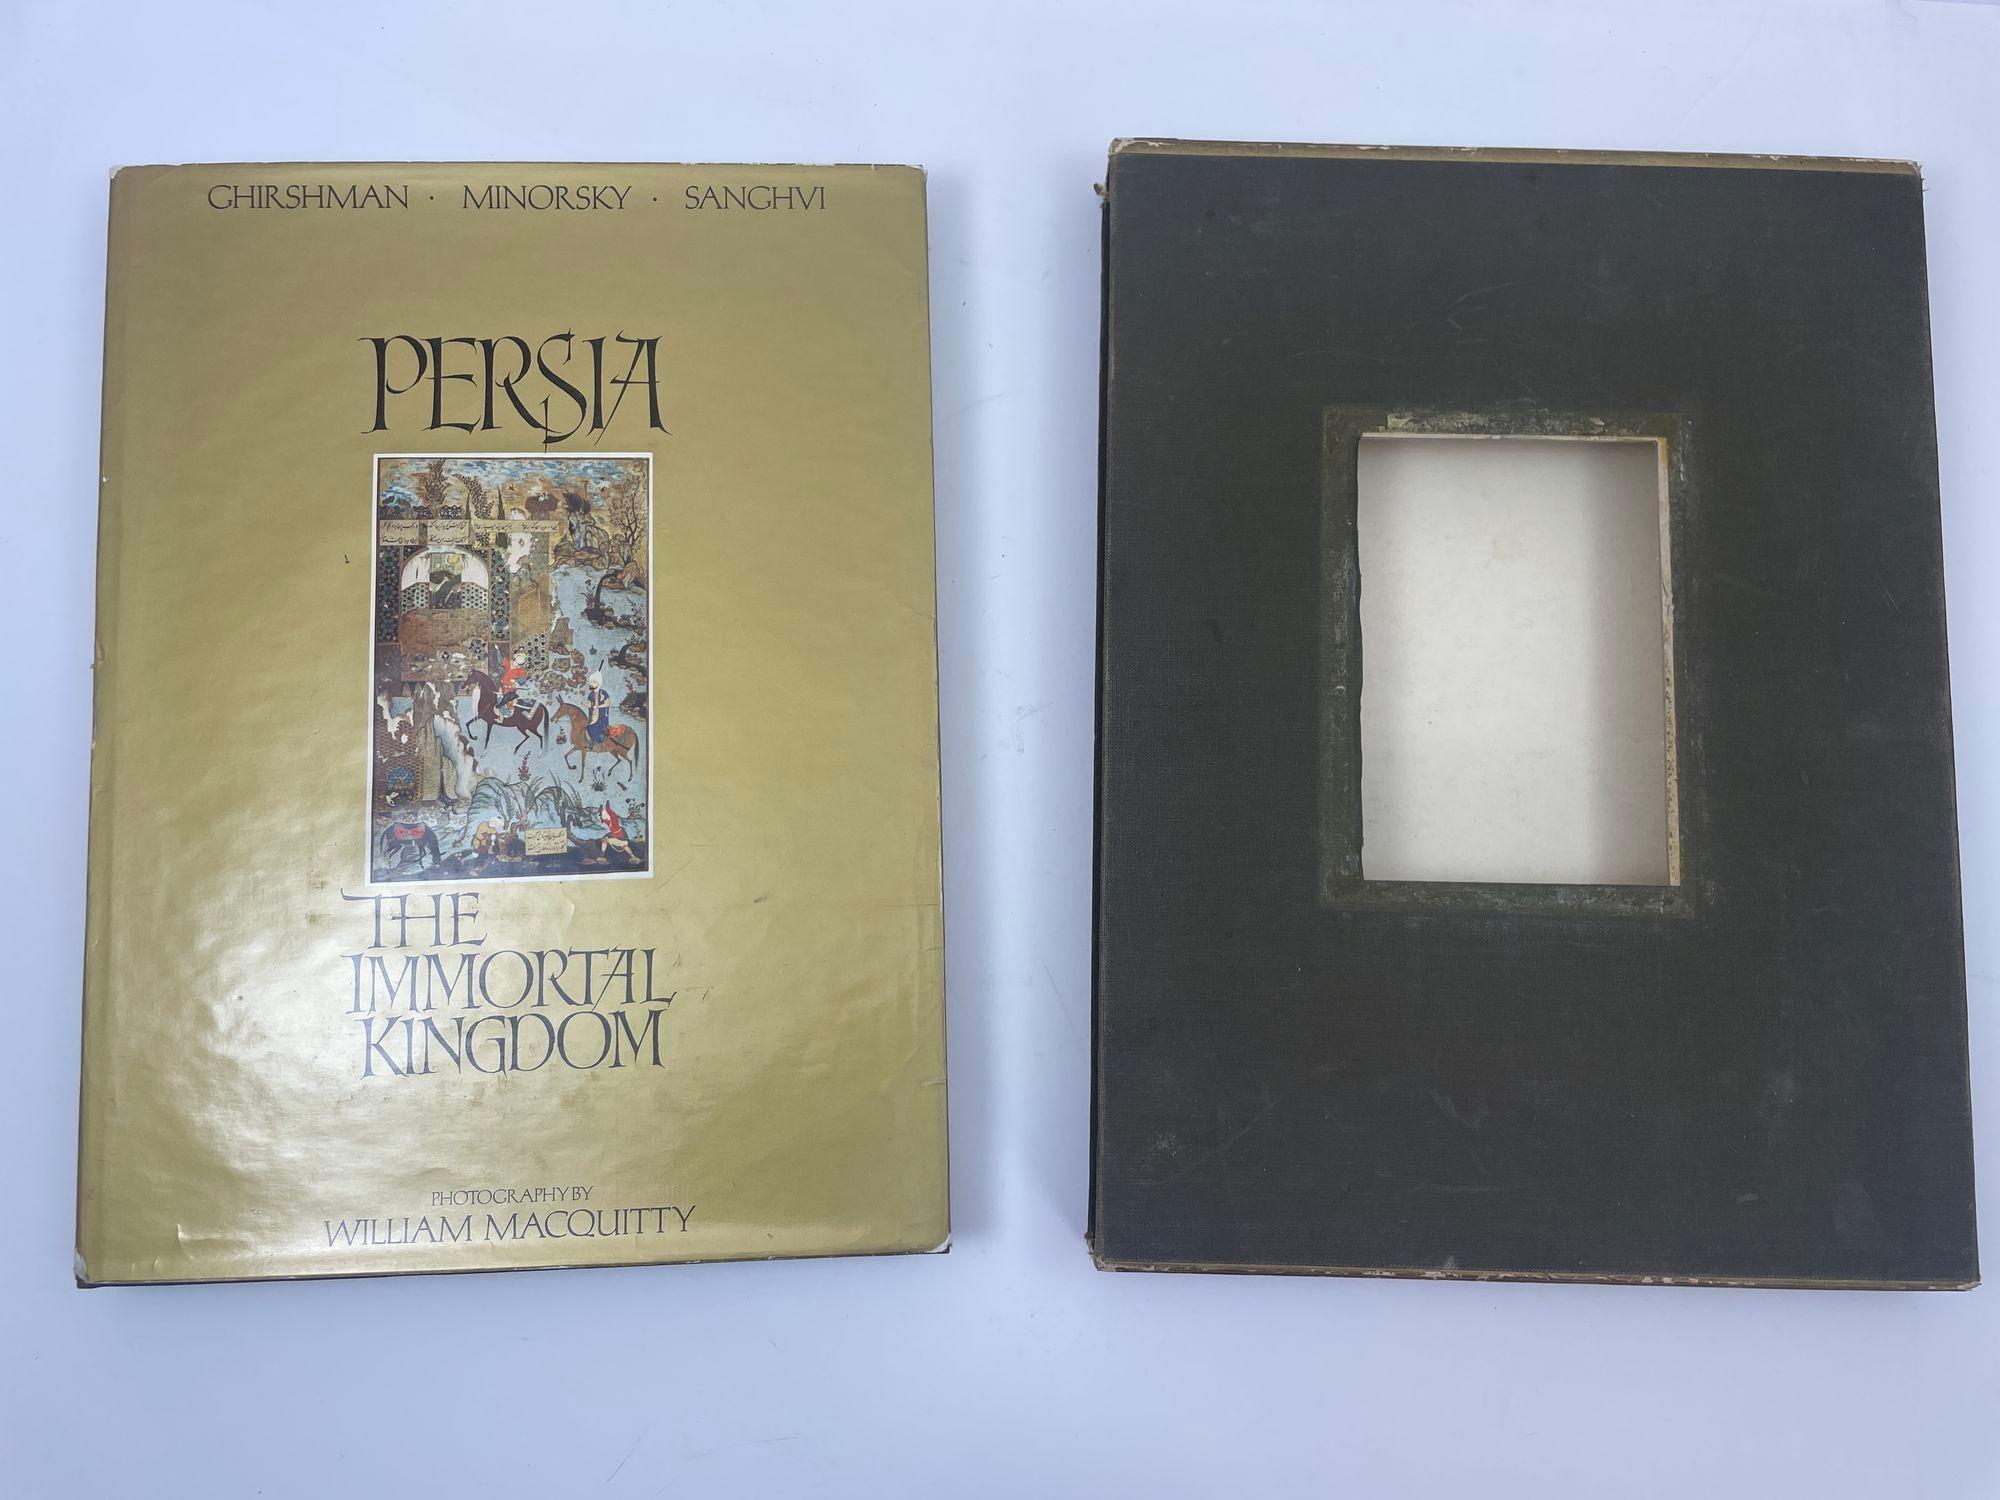 Persia The Immortal Kingdom by Ghirshman Minorsky Sanghvi 1971 In Good Condition For Sale In North Hollywood, CA